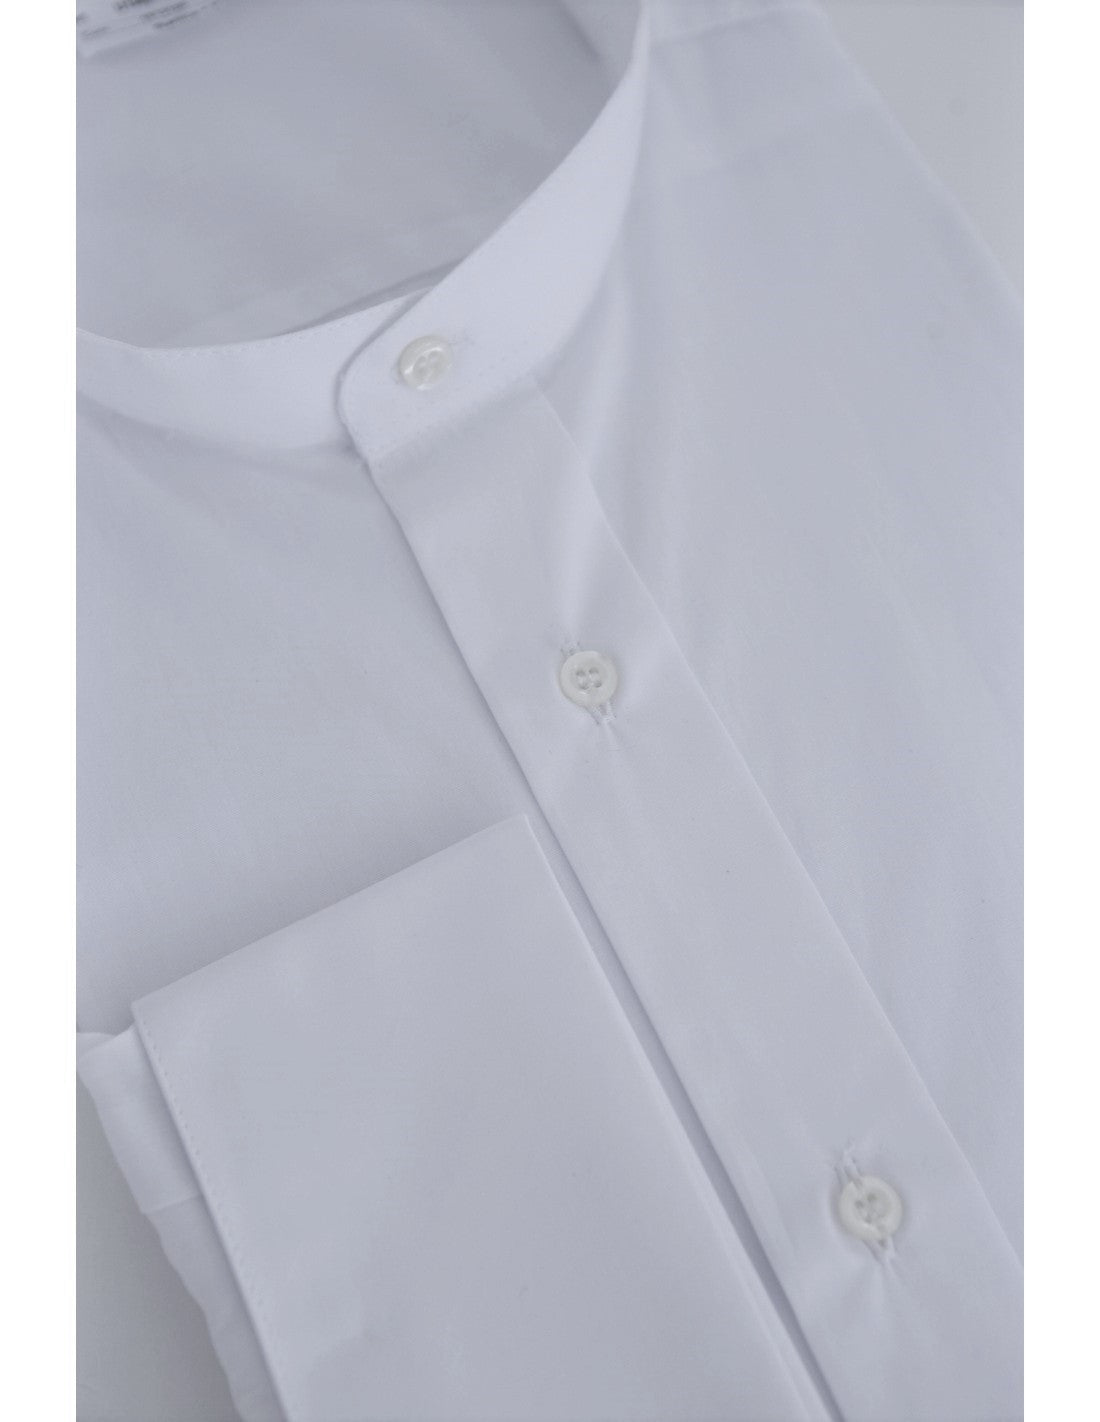 WHITE UNDER CASSOCK CLERGY SHIRT - POLY/COTTON - DOUBLE CUFFS| Barbiconi